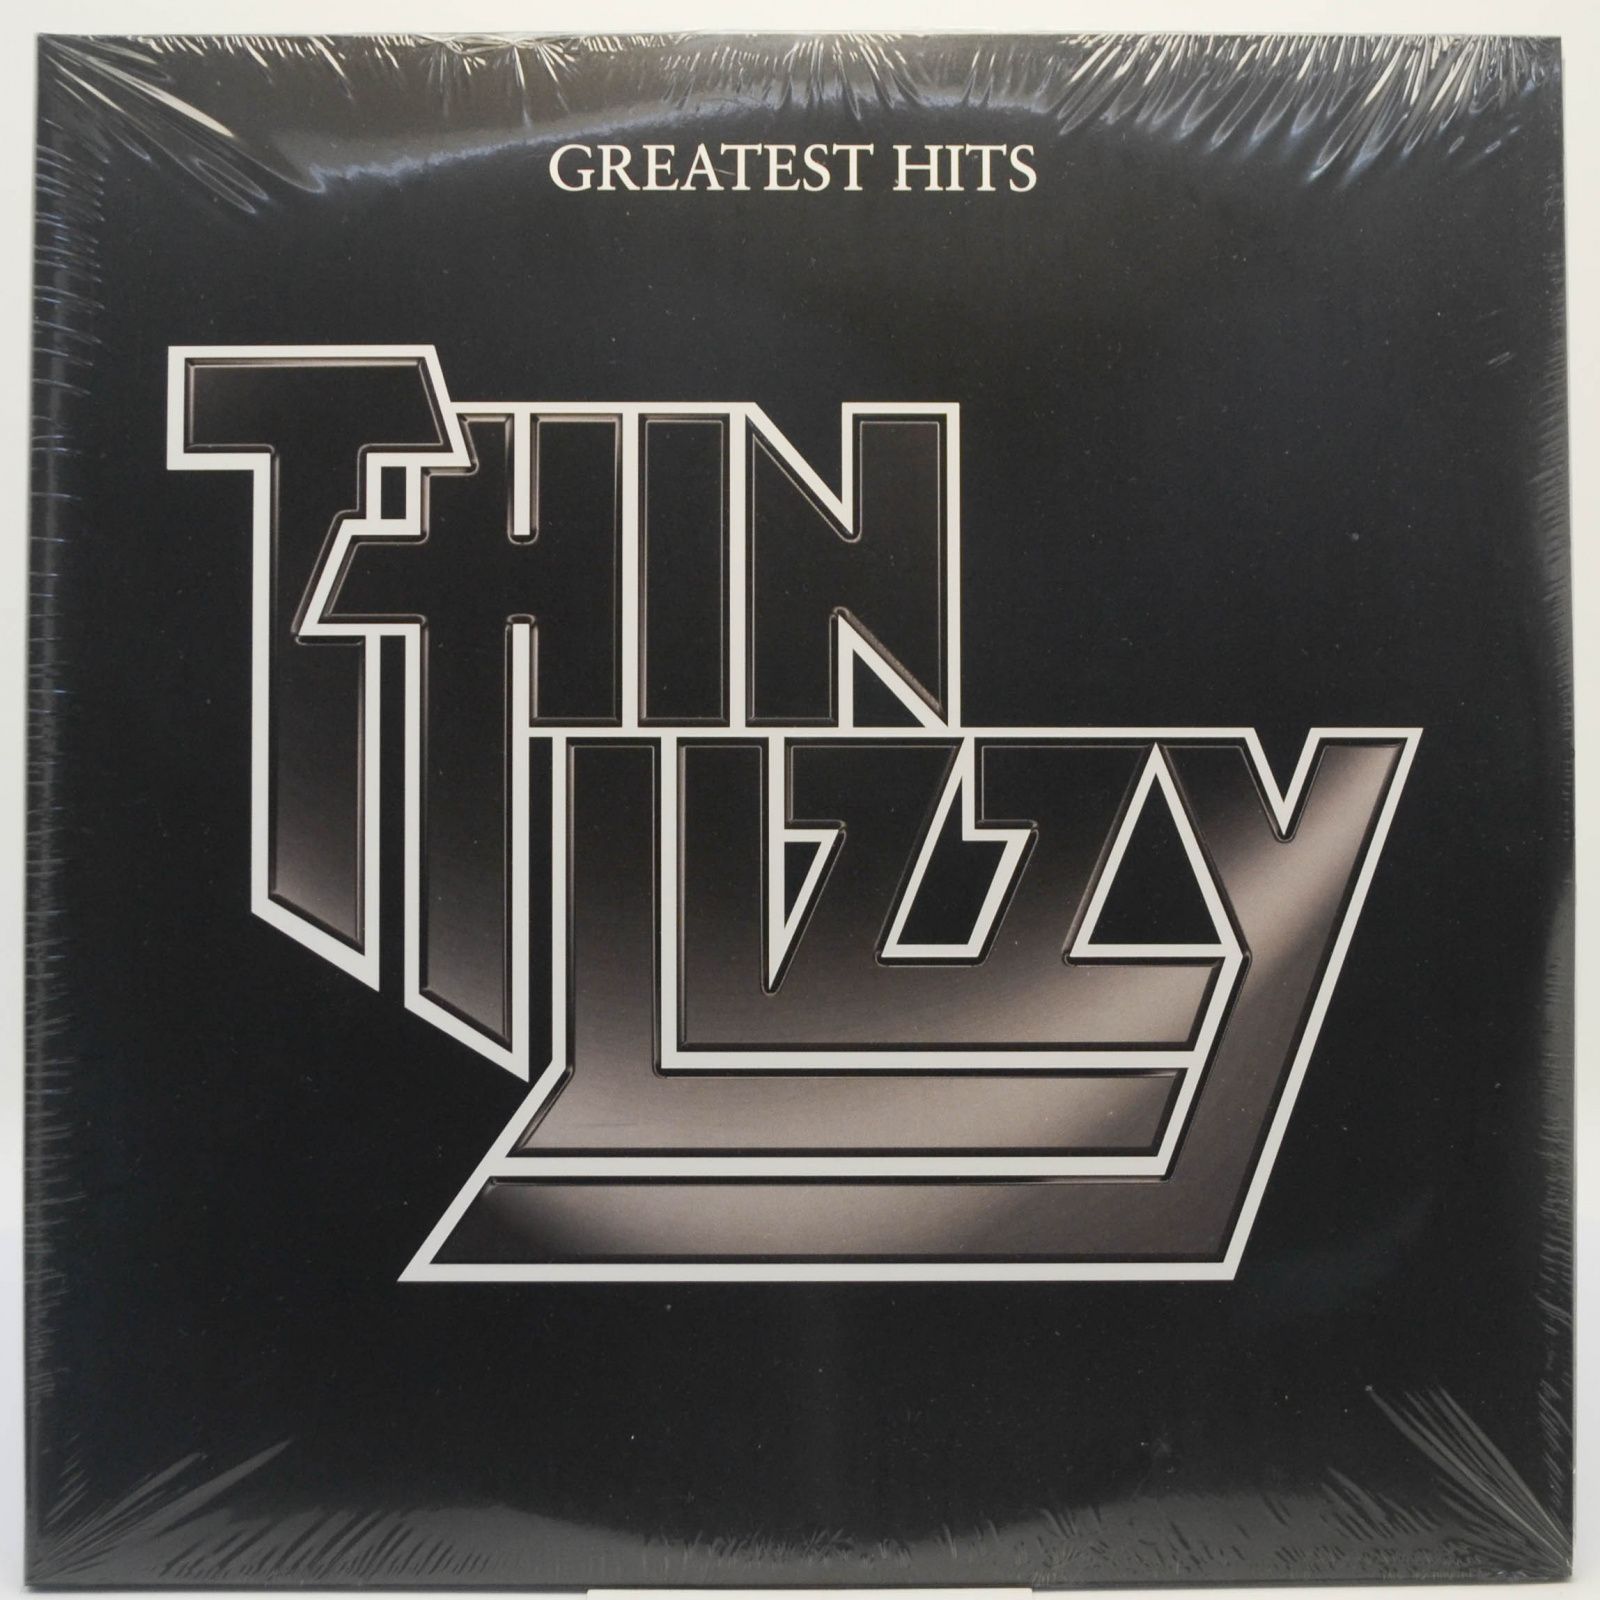 Thin Lizzy — Greatest Hits (2LP), 2021